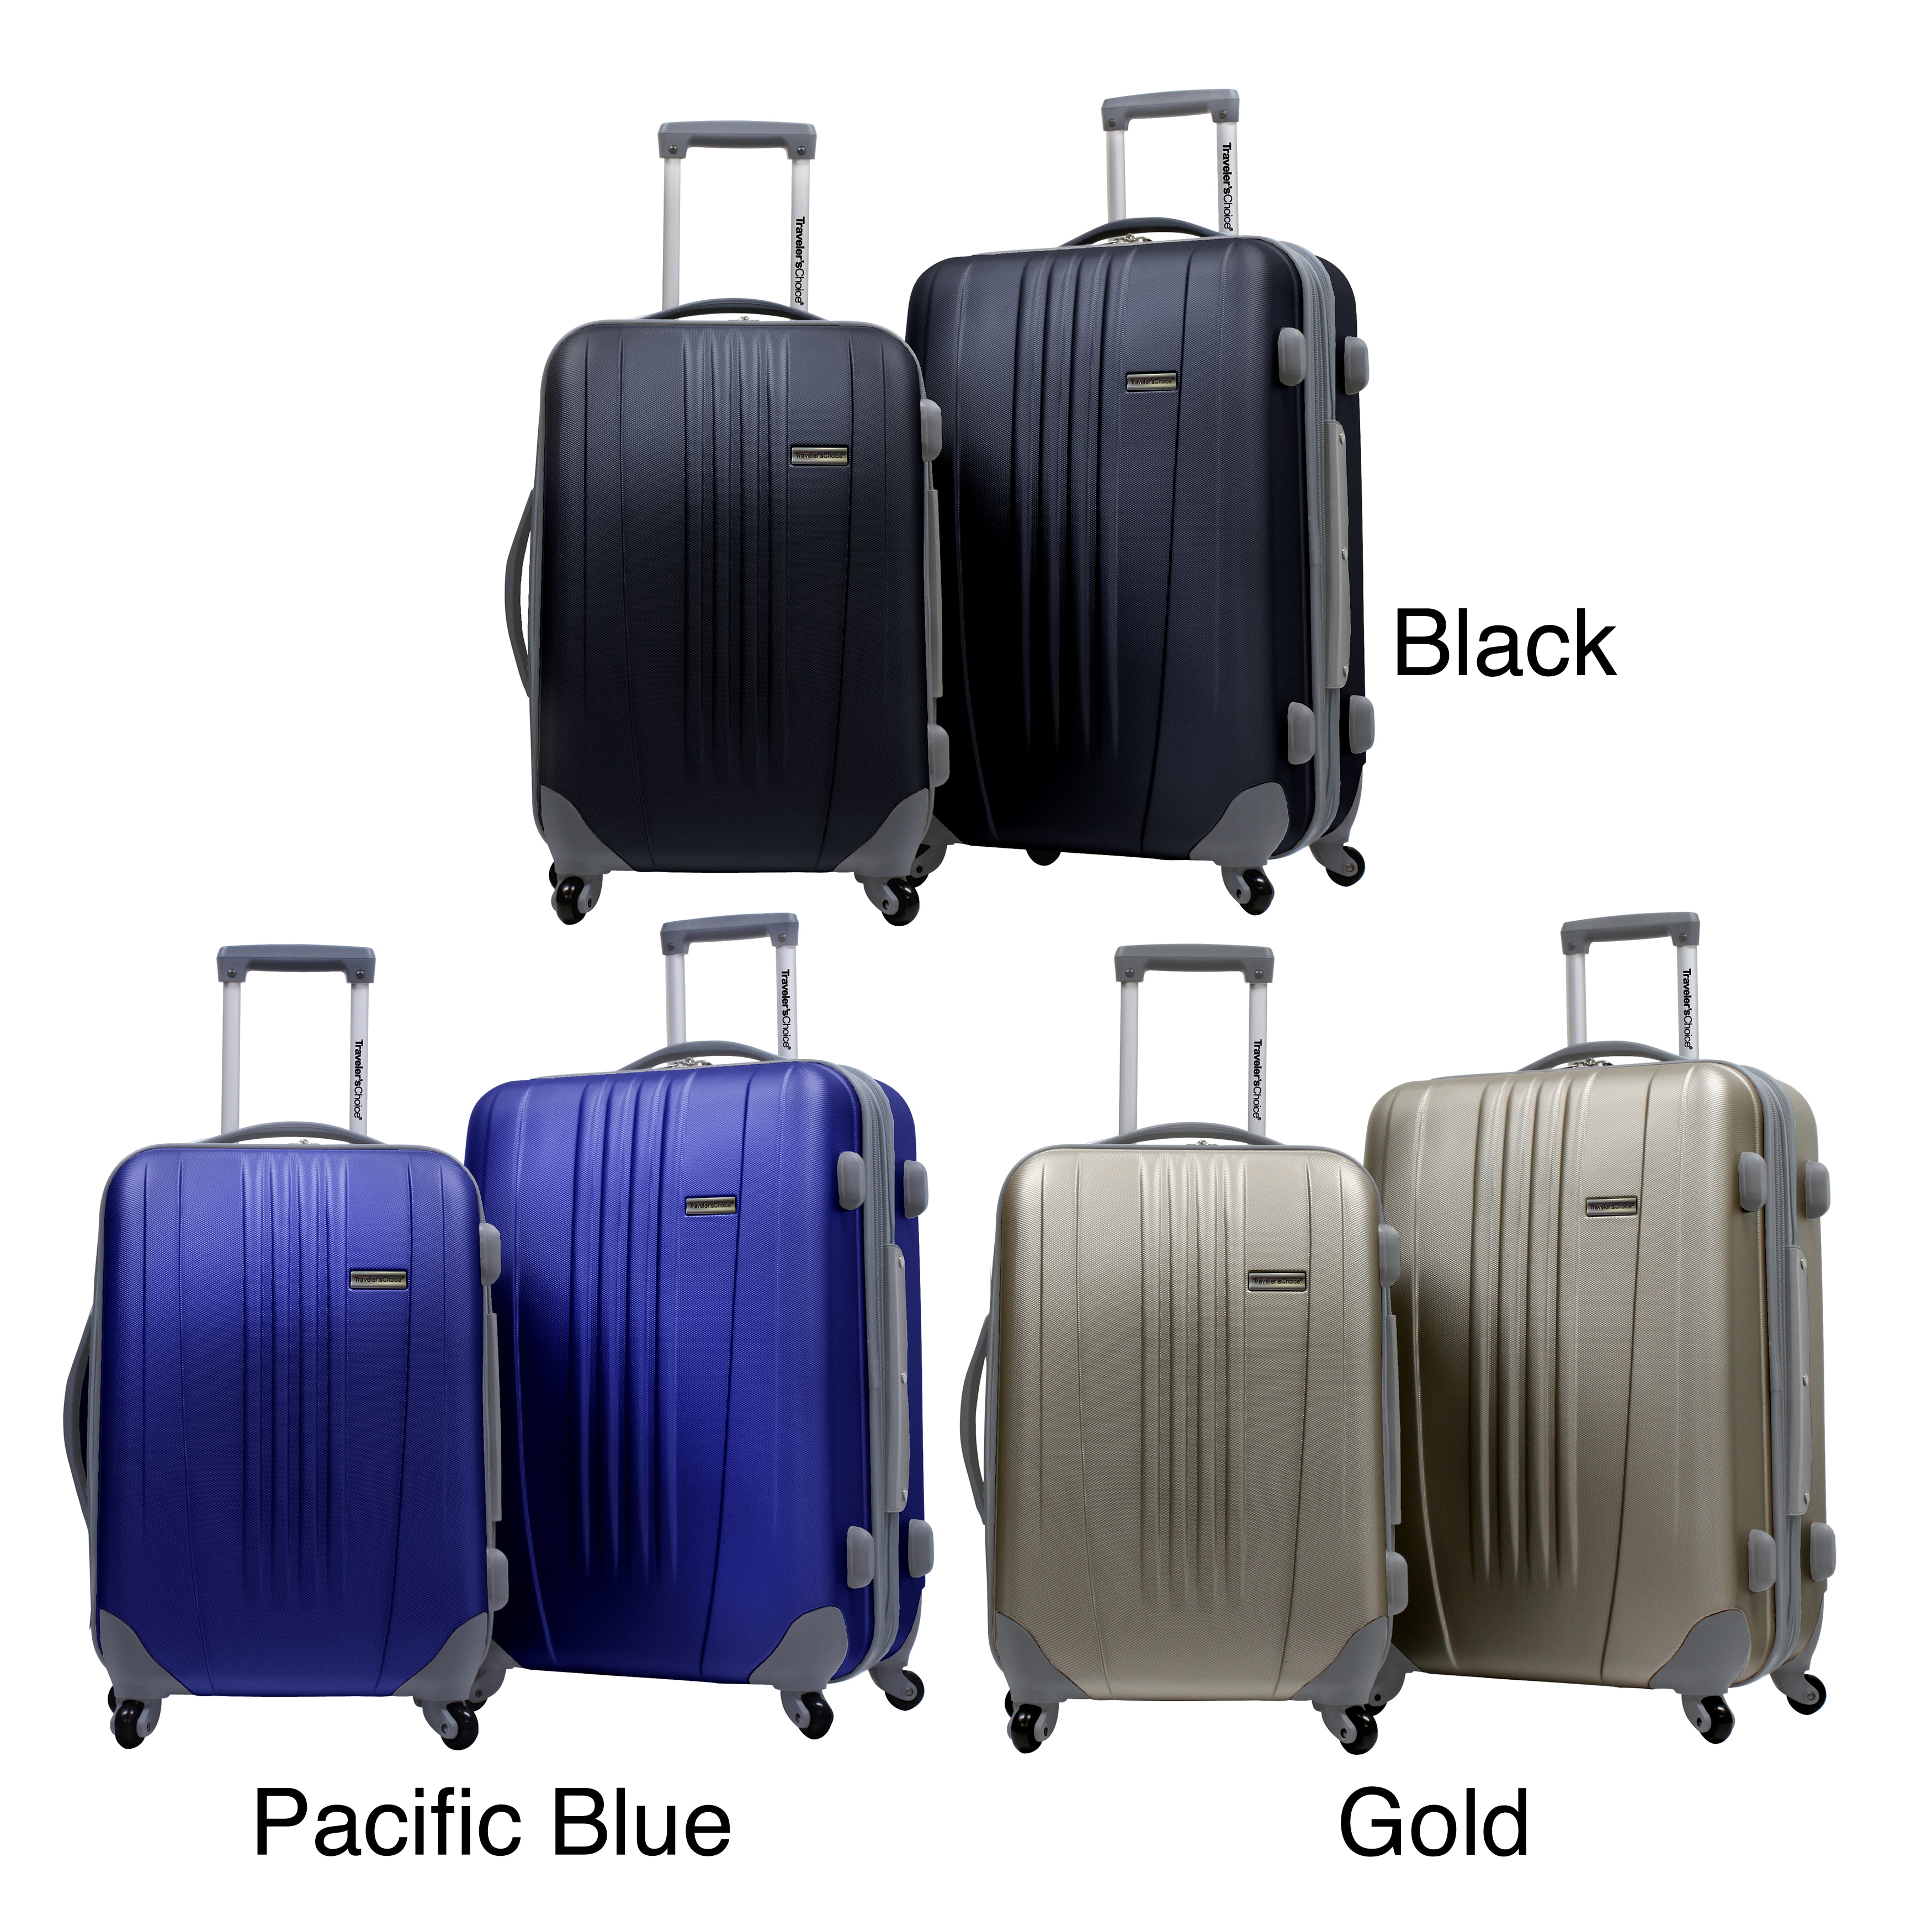 Luggage cover taobao hk, zenith luggage strap target, buy cheap luggage online australia jobs ...